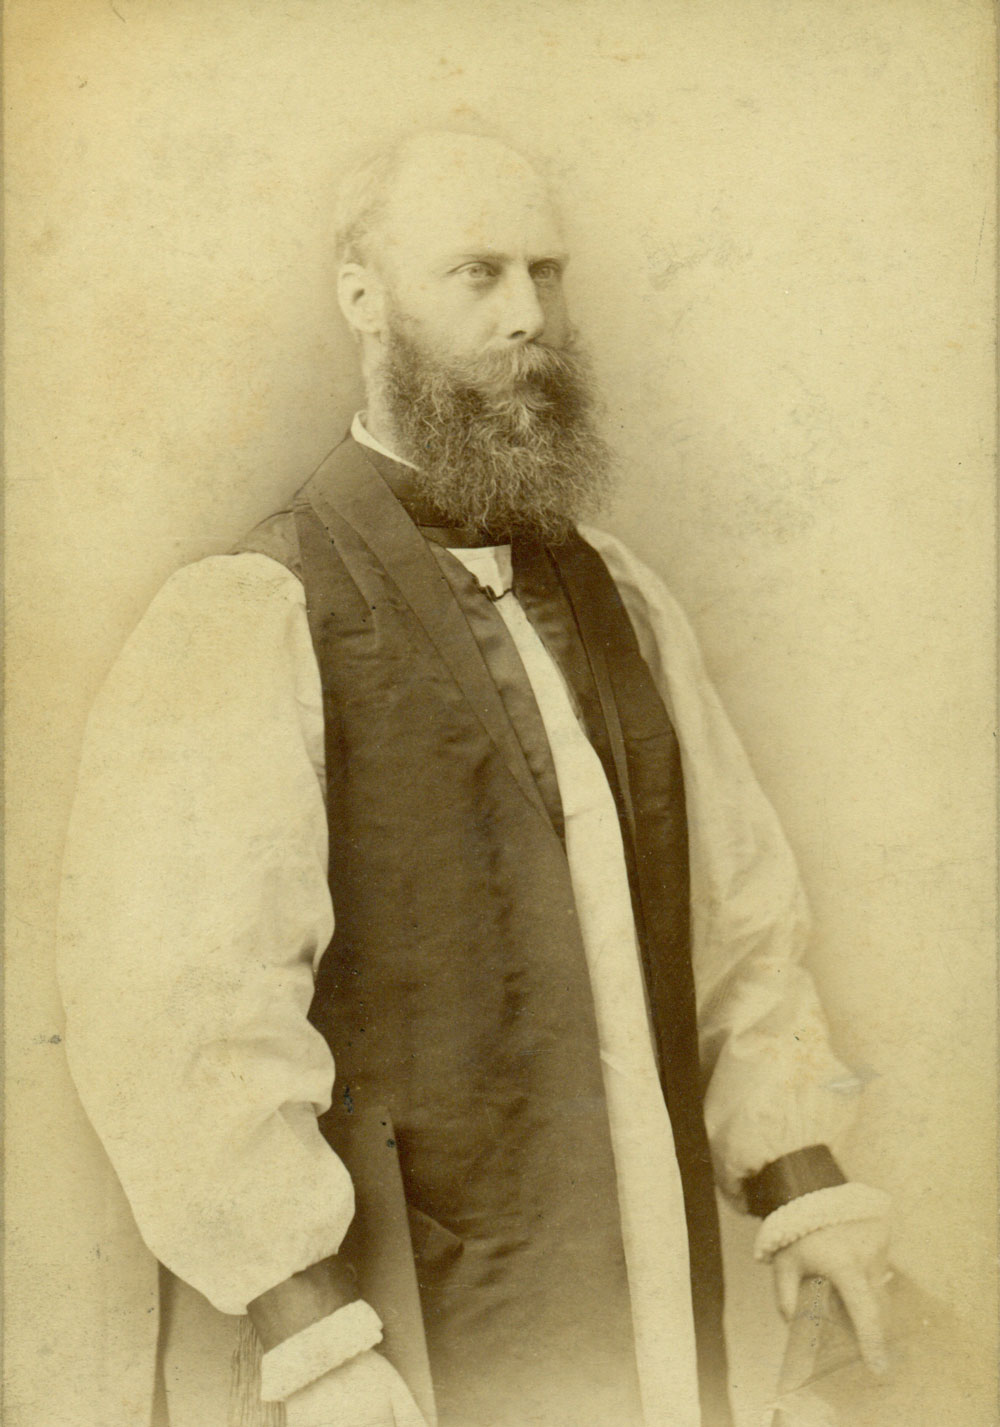 Image 2 of 6 - A formal portrait of Bishop Sydney Linton. He stands, looking to the right of frame wearing vestments